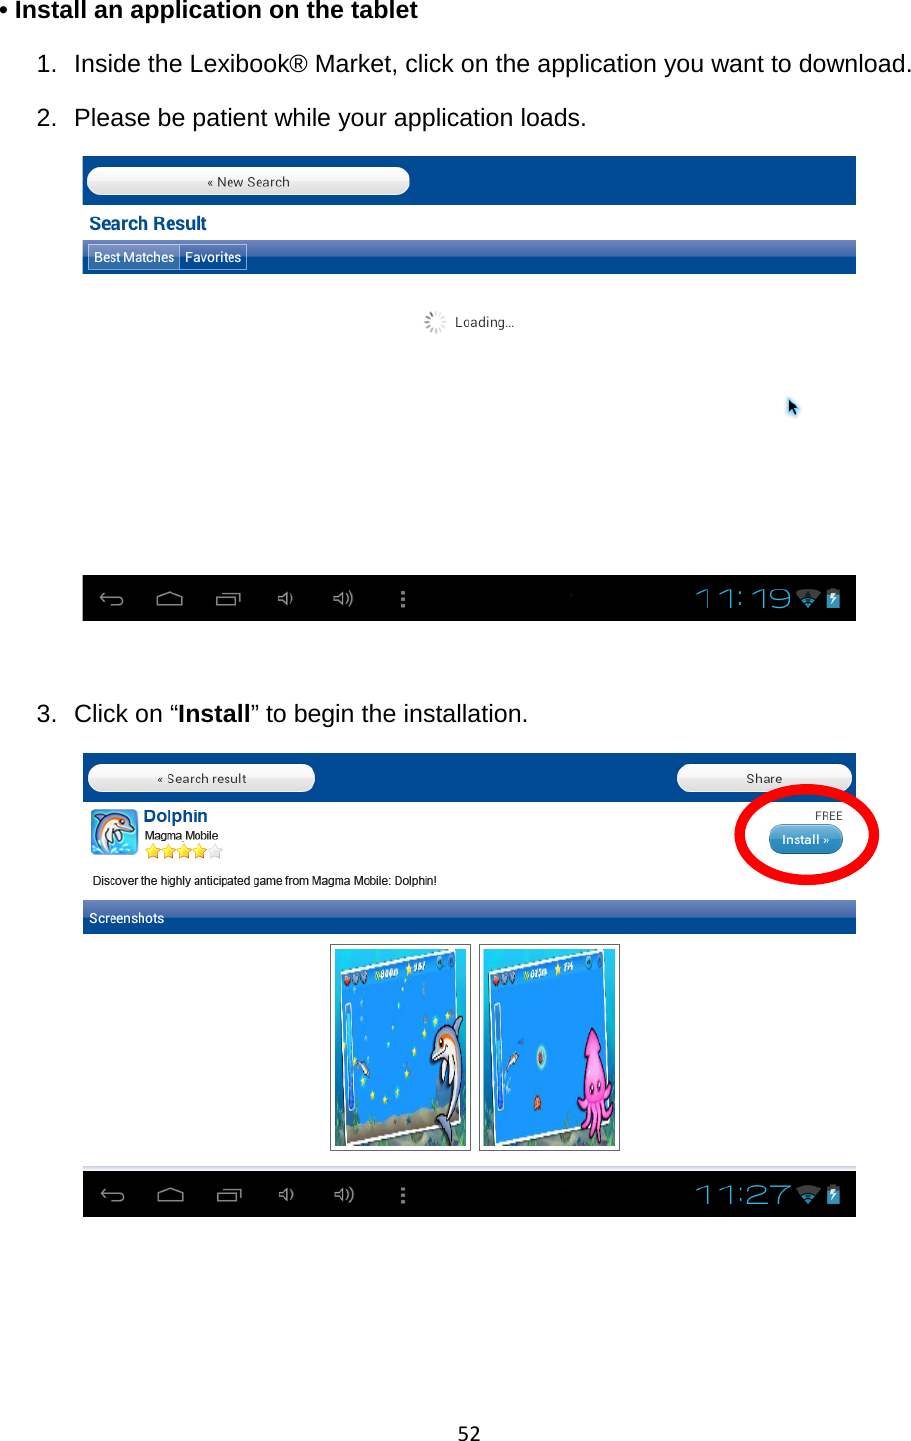 52  • Install an application on the tablet 1. Inside the Lexibook® Market, click on the application you want to download. 2. Please be patient while your application loads.   3. Click on “Install” to begin the installation.     